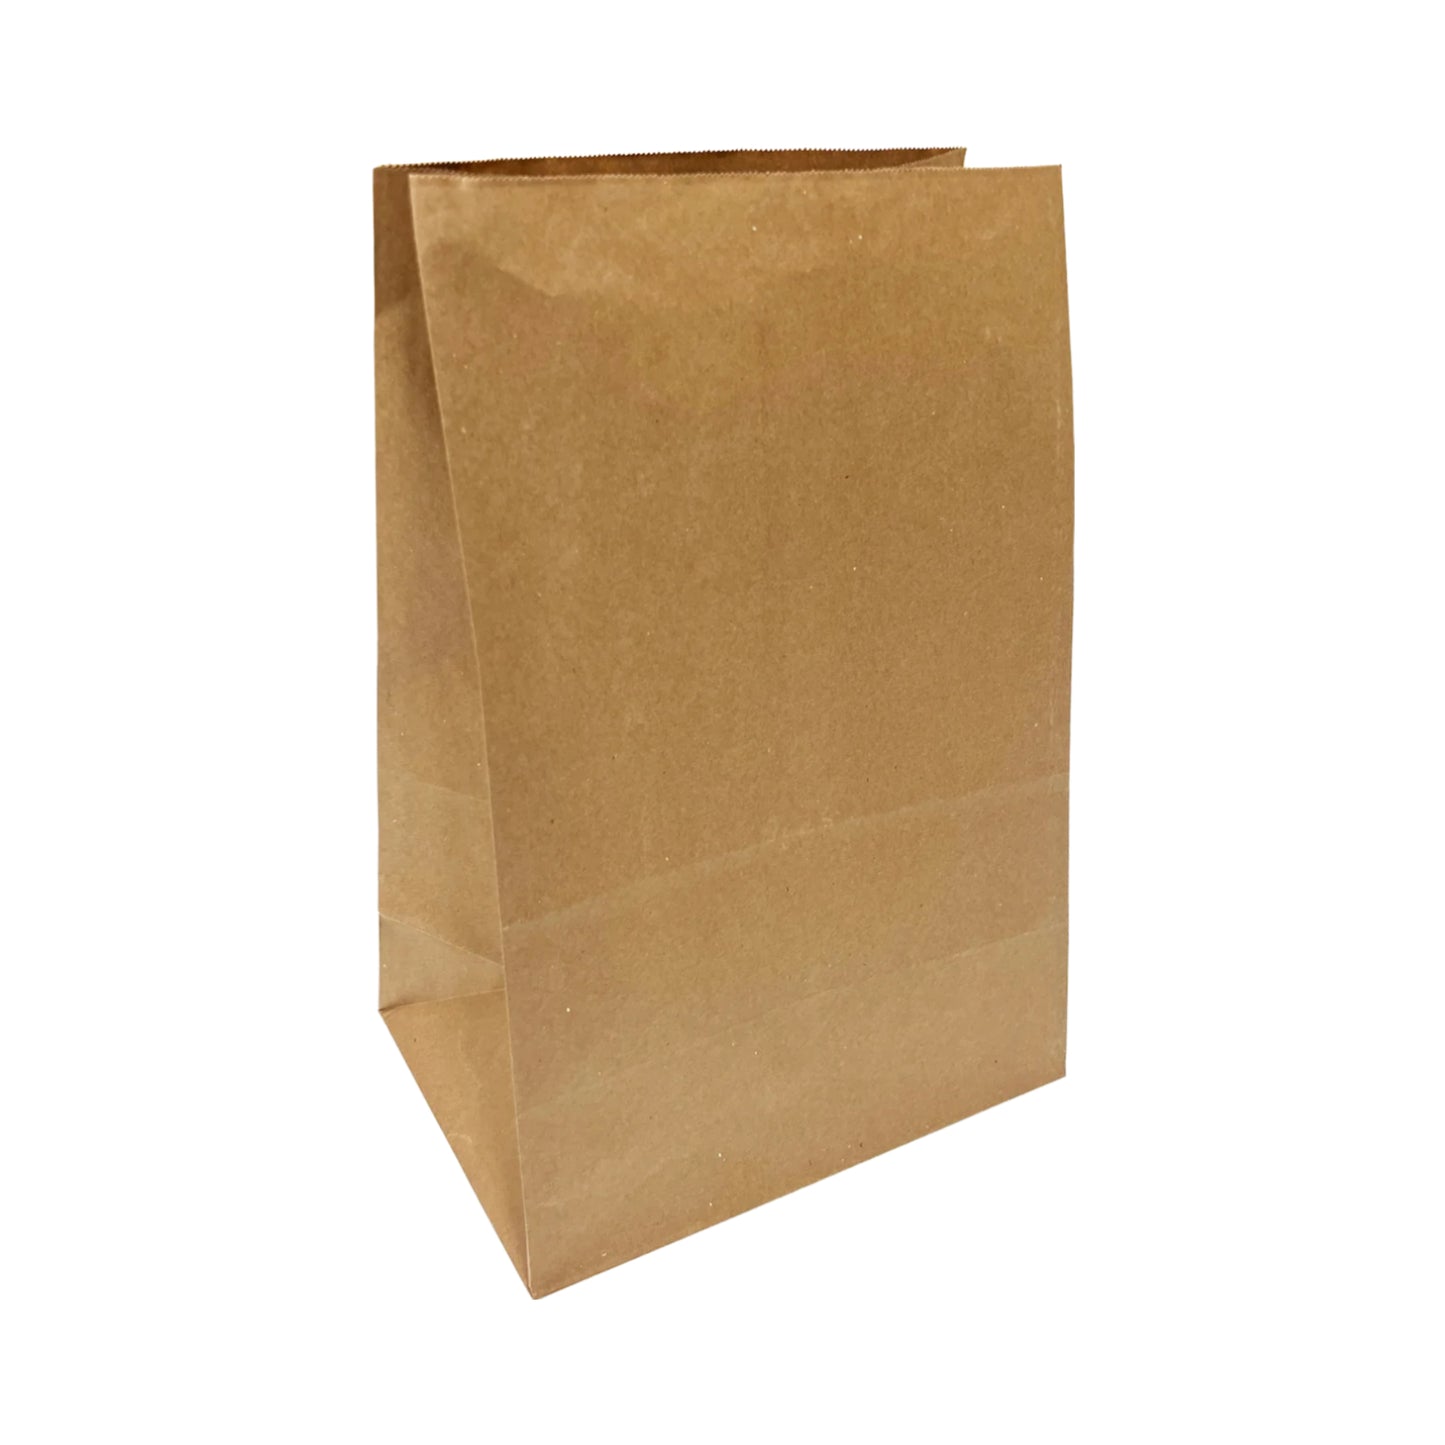 500pcs #5 Grocery Bags 5.25x3.25x11 inches; $0.04/pc